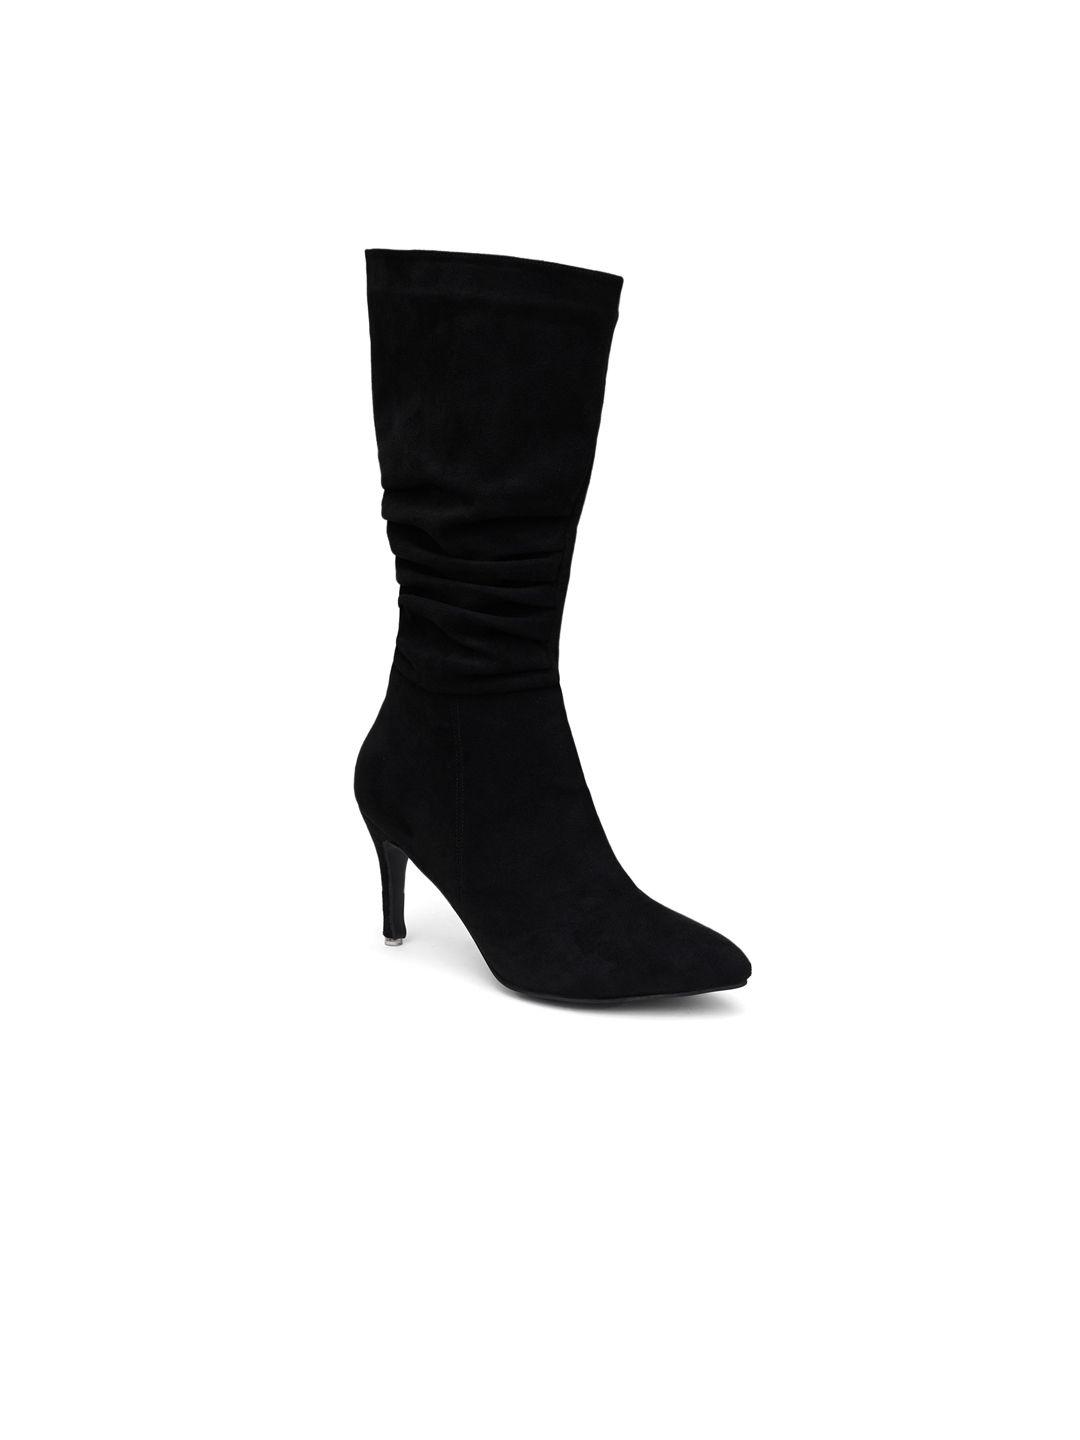 sherrif shoes women slim heeled suede high-top slouchy boots